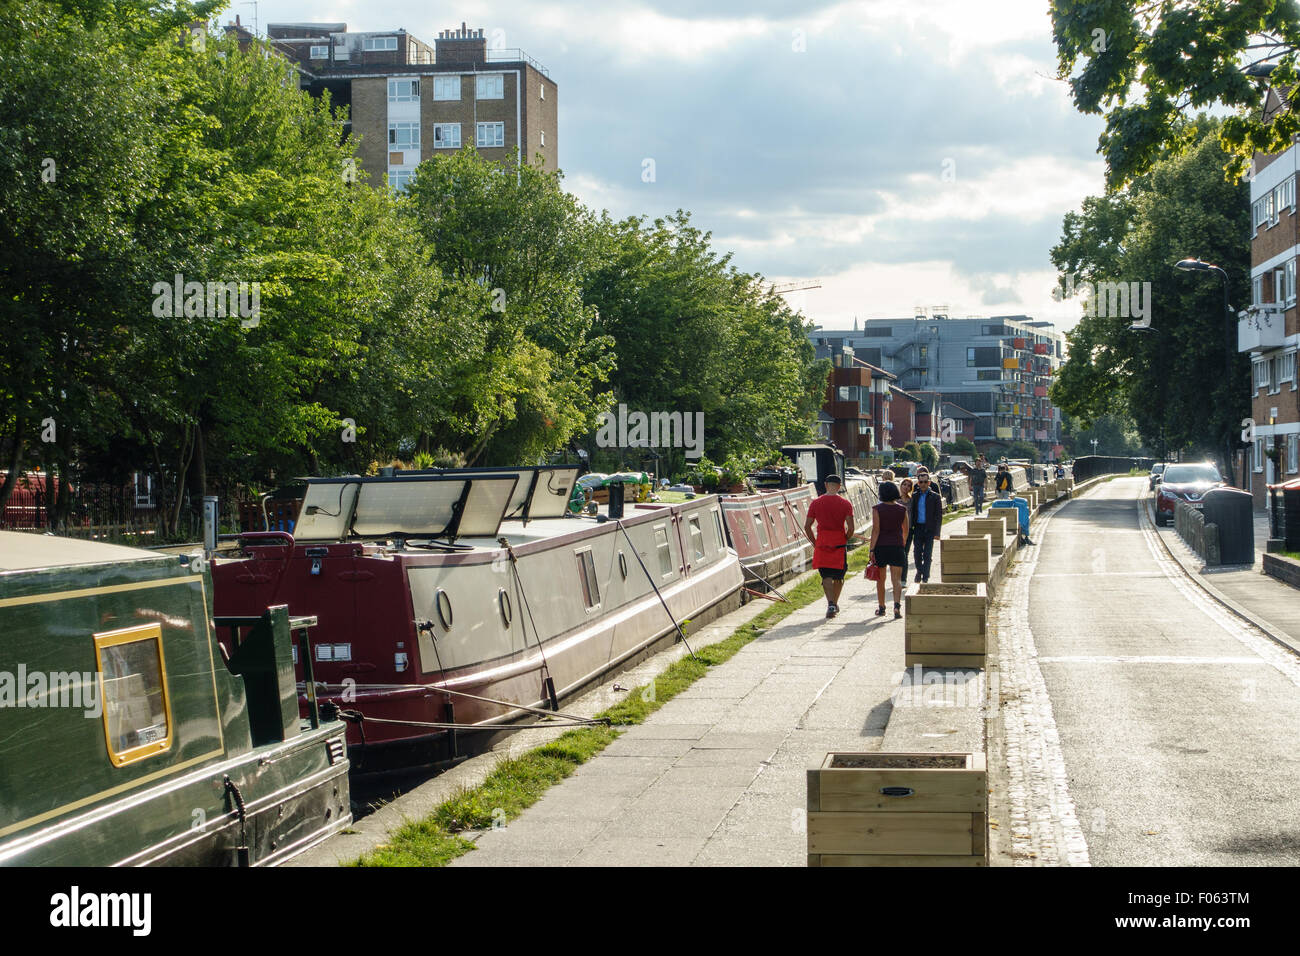 People spending a sunny weekend day in summer 2015 by a canal in East London. Stock Photo